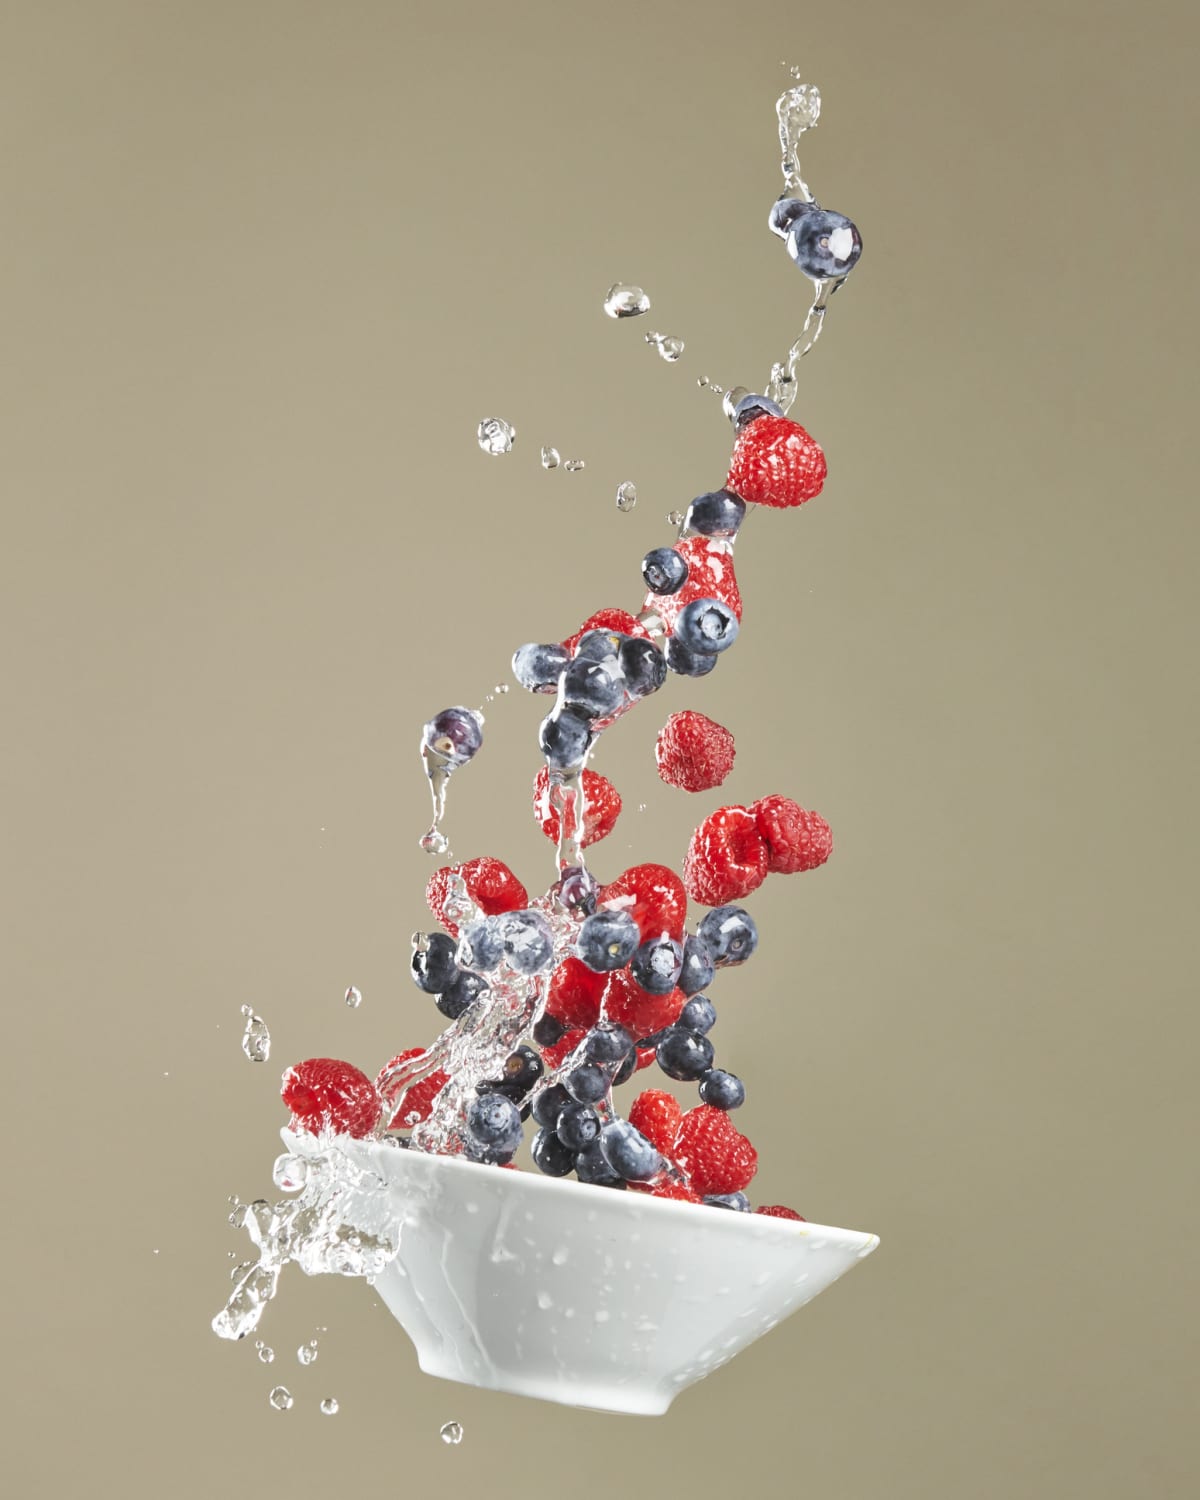 A bowl of blueberries is frozen in motion mid-air